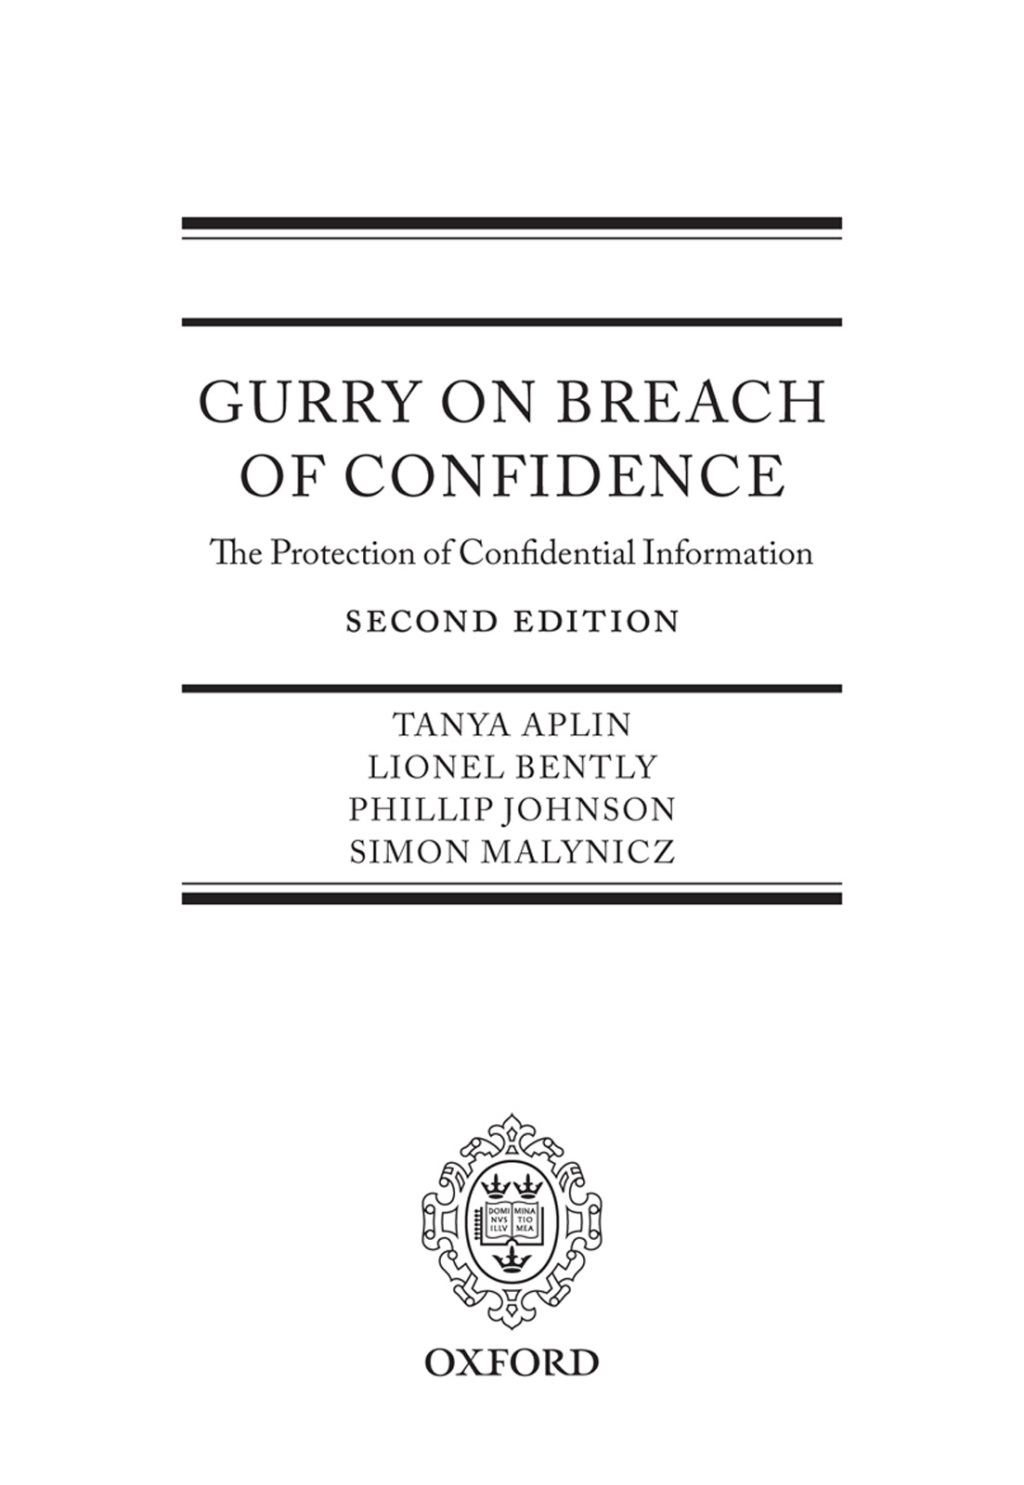 Gurry on Breach of Confidence - 2nd Edition (eBook Rental)